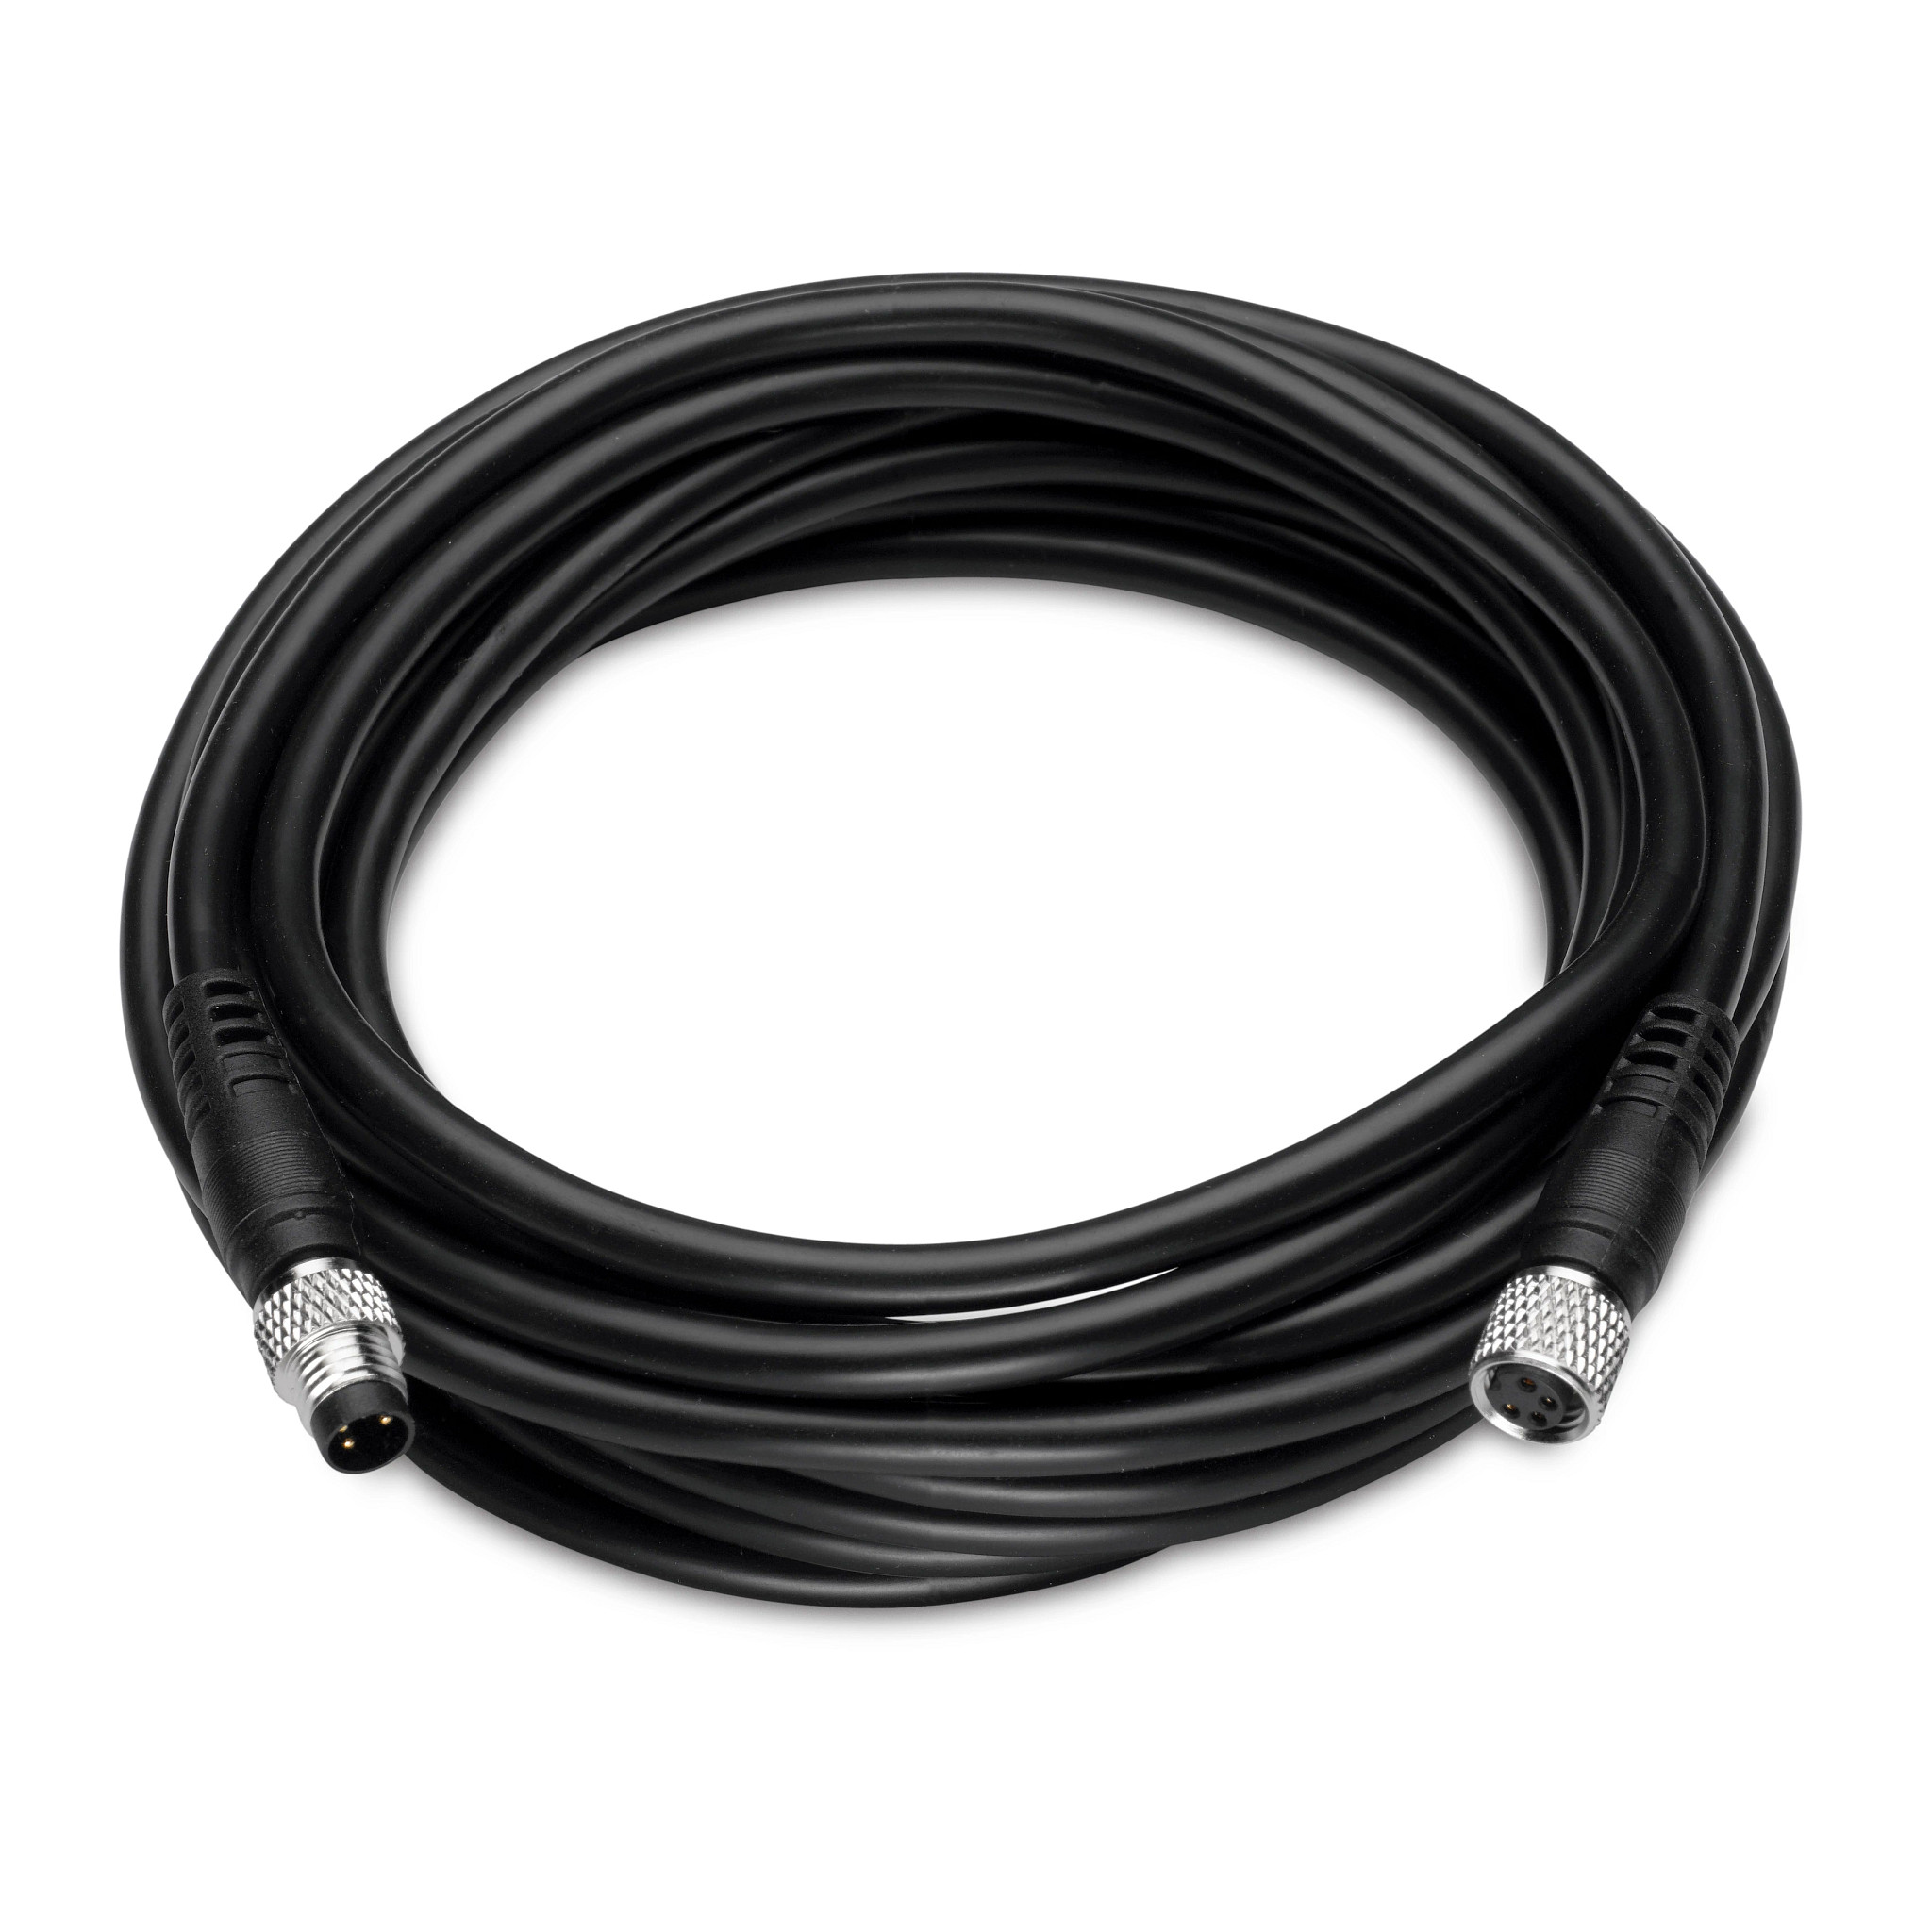 Minn Kota MDI Adapter Cable for HB HELIX 7 1852086 